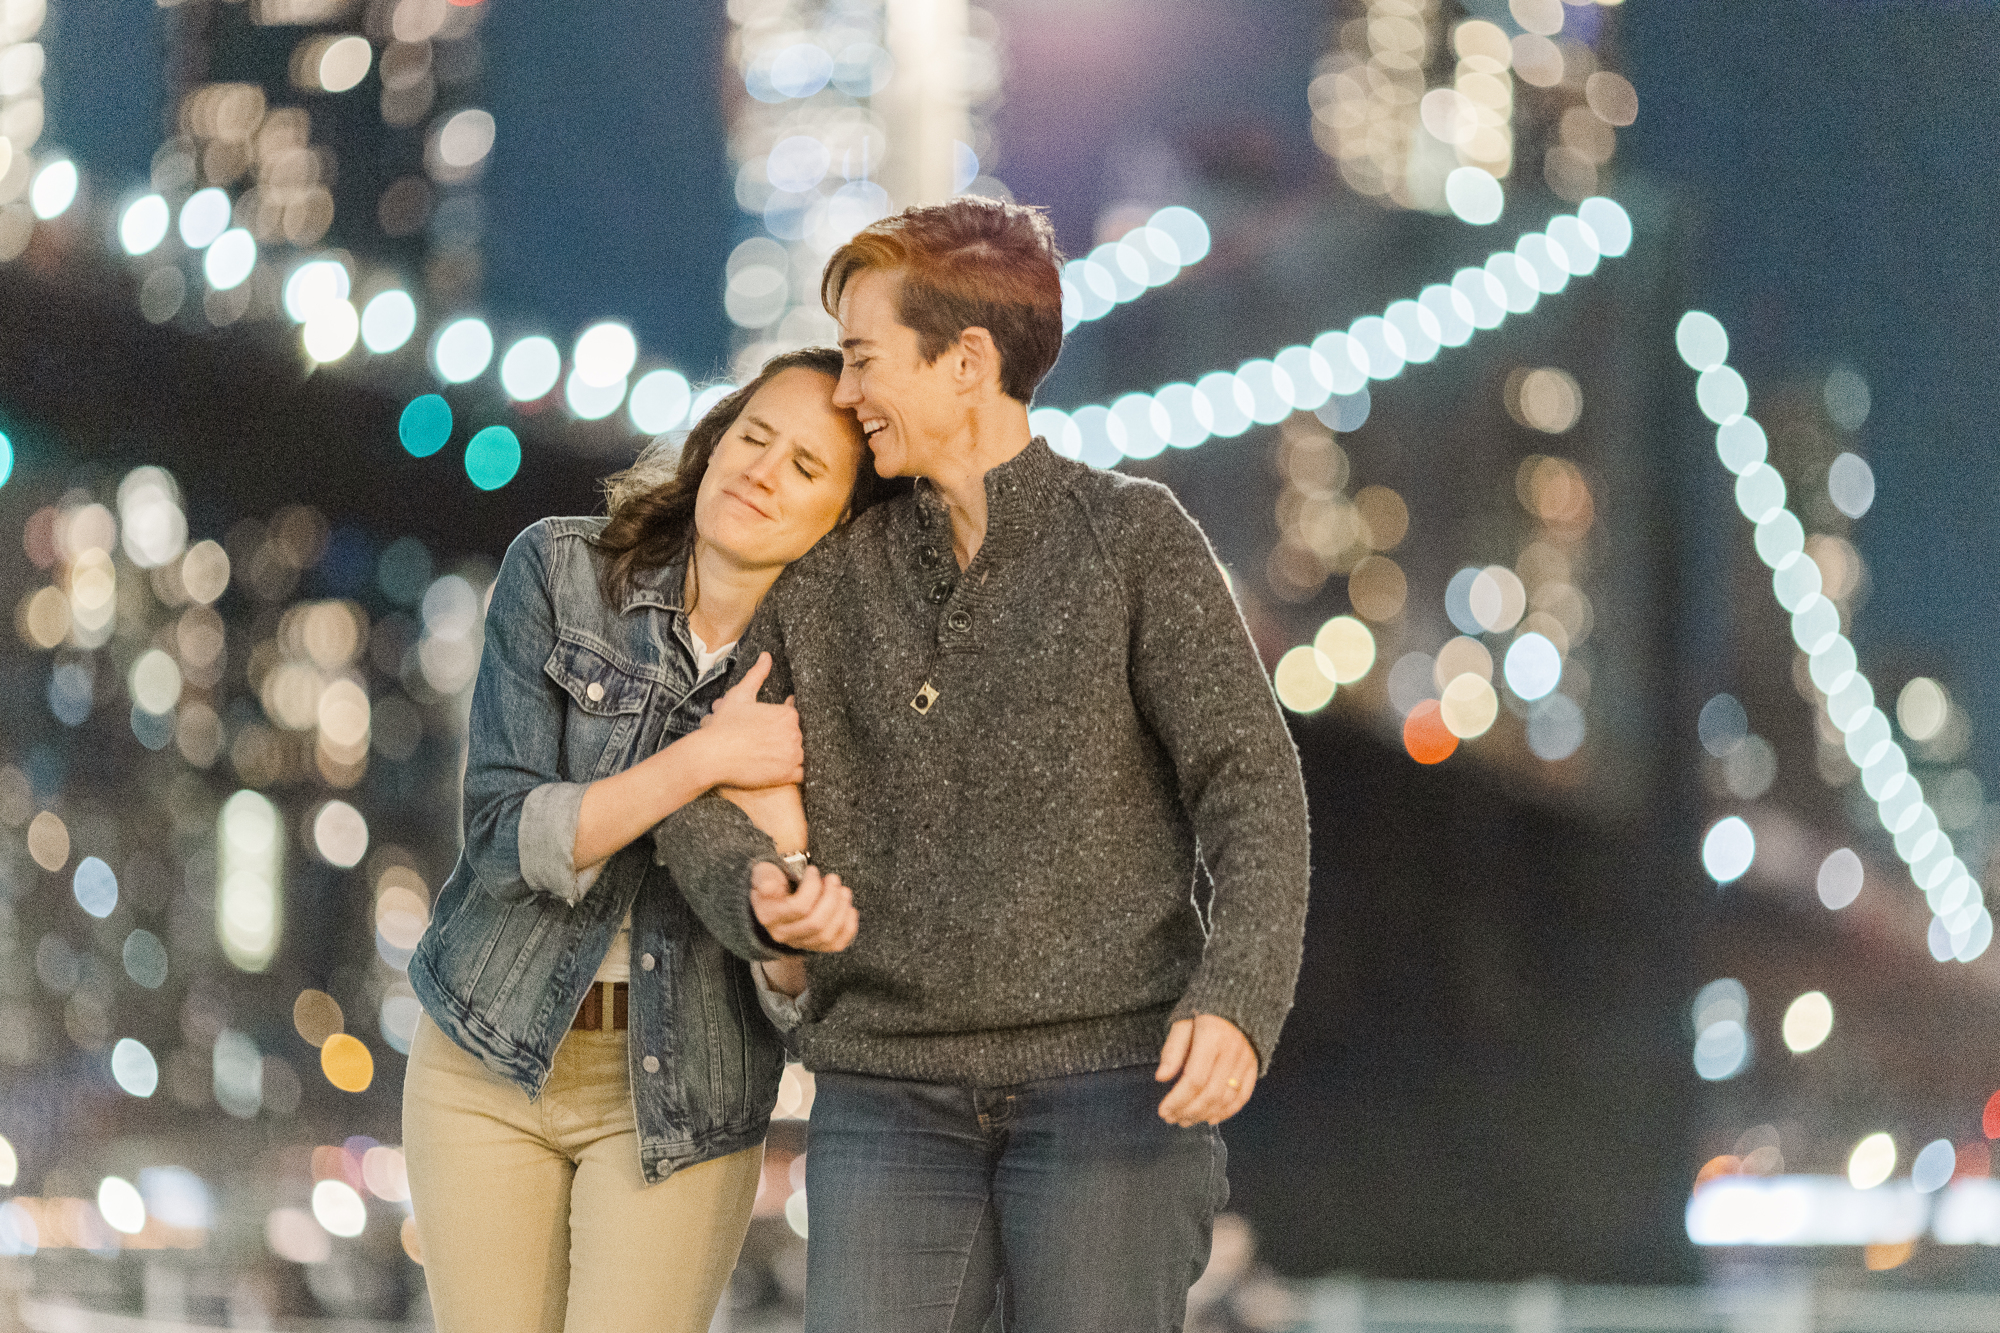 Special DUMBO Engagement Photo Shoot in NYC